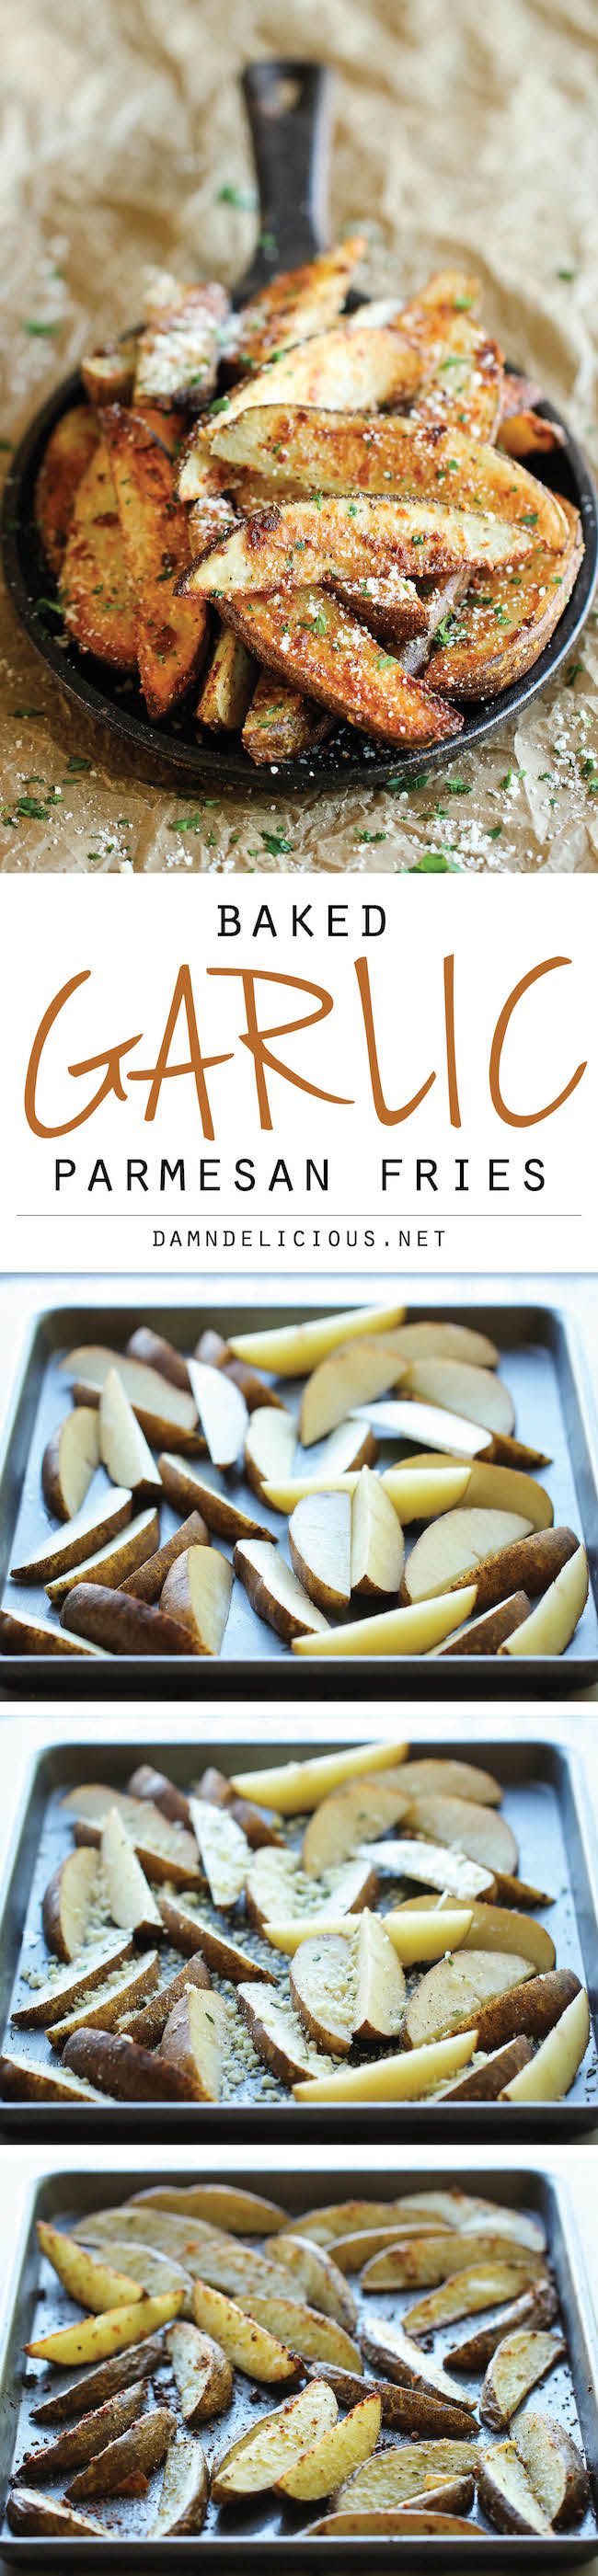 Garlic Parmesan Fries – Amazingly crisp, oven-baked fries coated with freshly grated Parmesan and a generous dose of garlic